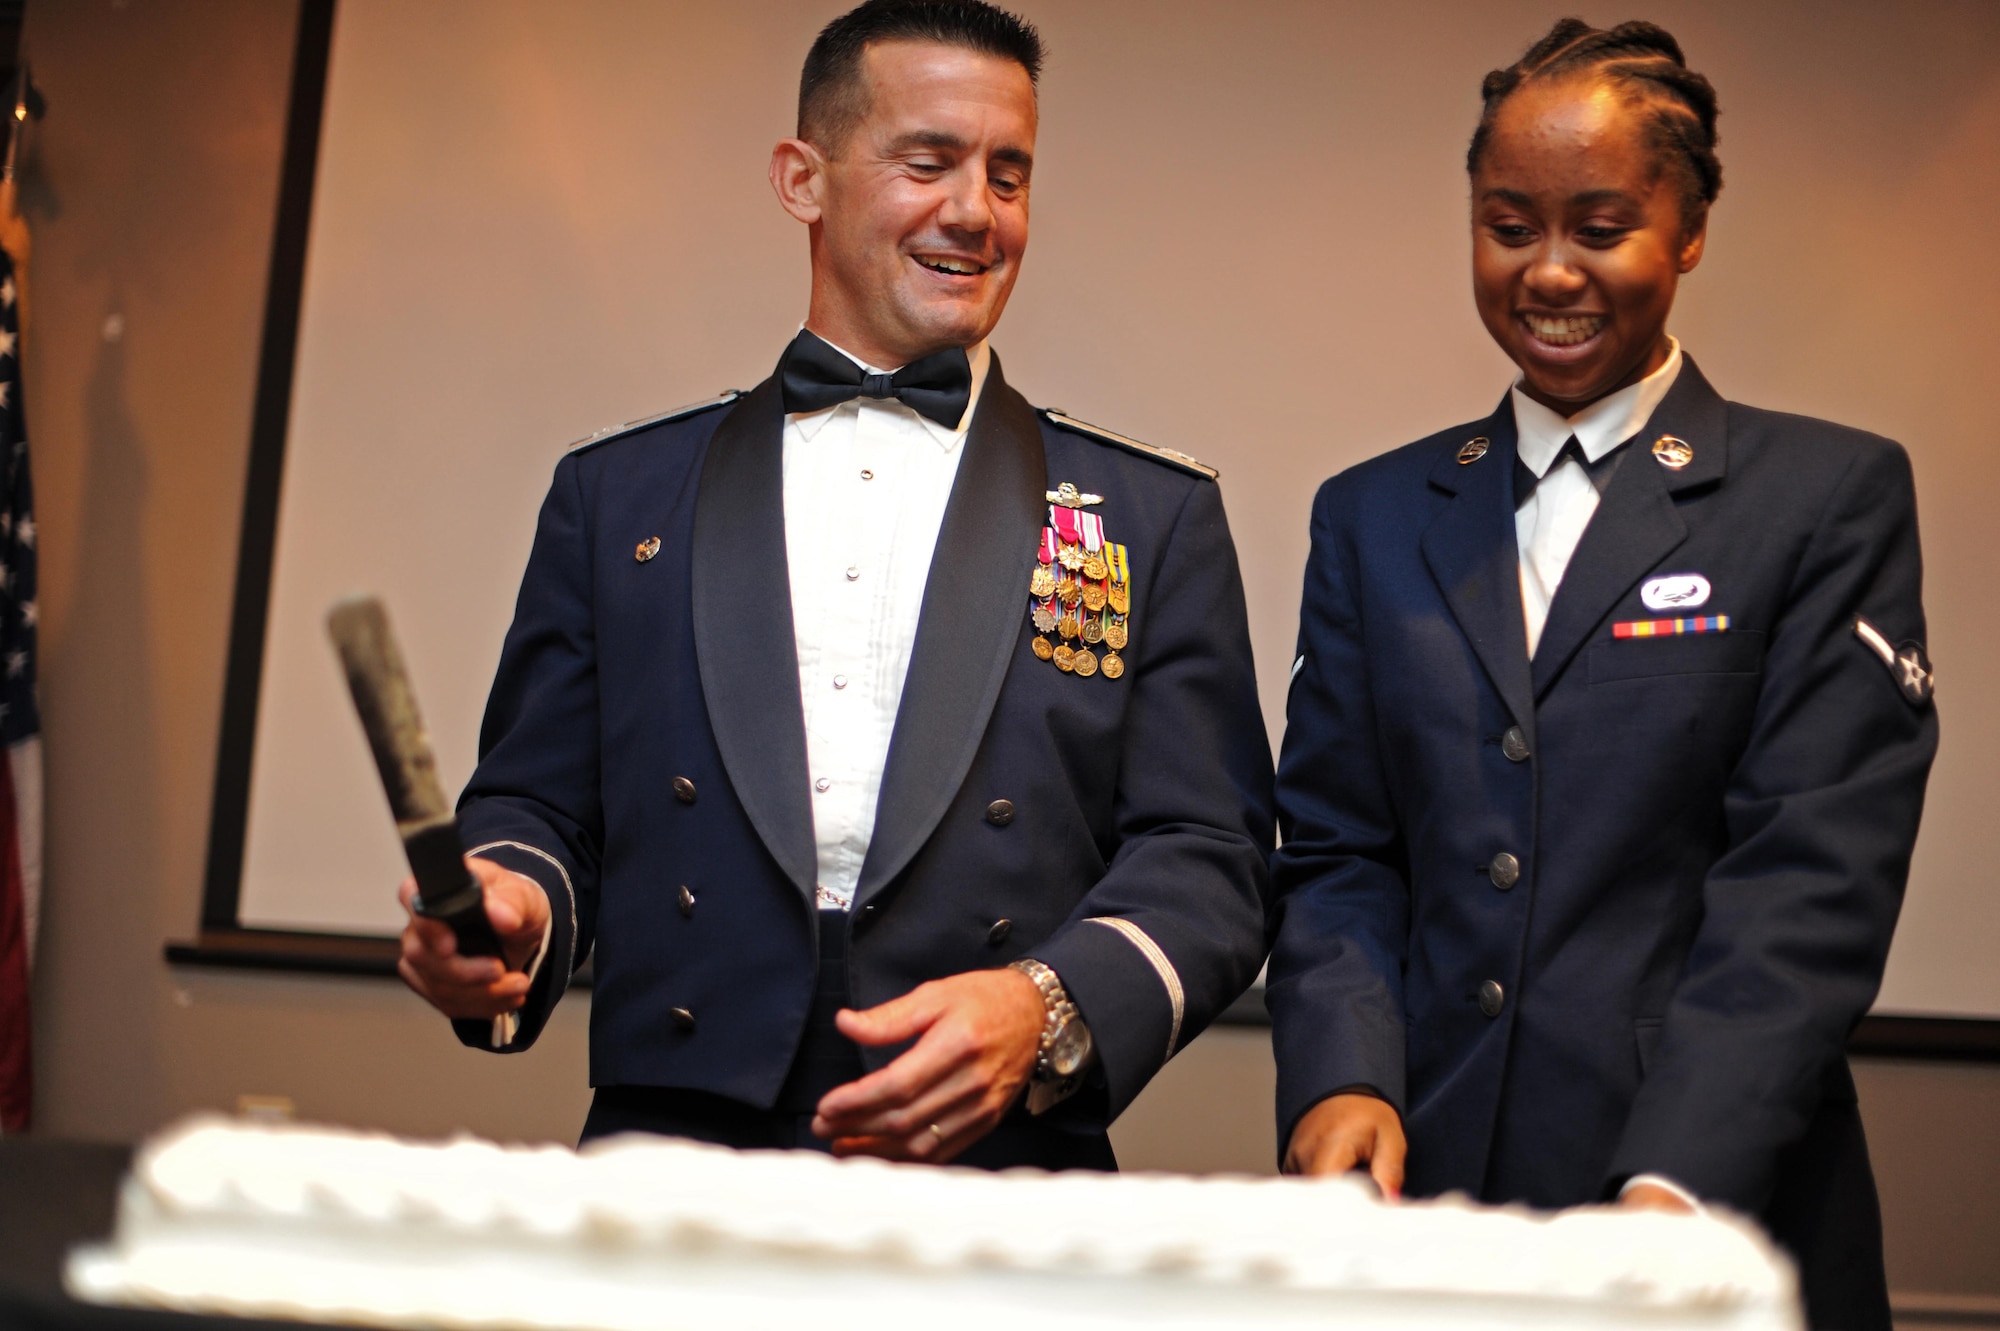 Col. Charles Velino, 47th Flying Training Wing commander and Airman Brittany Zipperian, 47th Force Support Squadron apprentice, cut the first slice of cake at the Air Force Ball at Laughlin Air Force Base, Texas, Sept. 30, 2017.  Traditionally, the oldest and youngest attendants to the ball cut the first slice of cake.